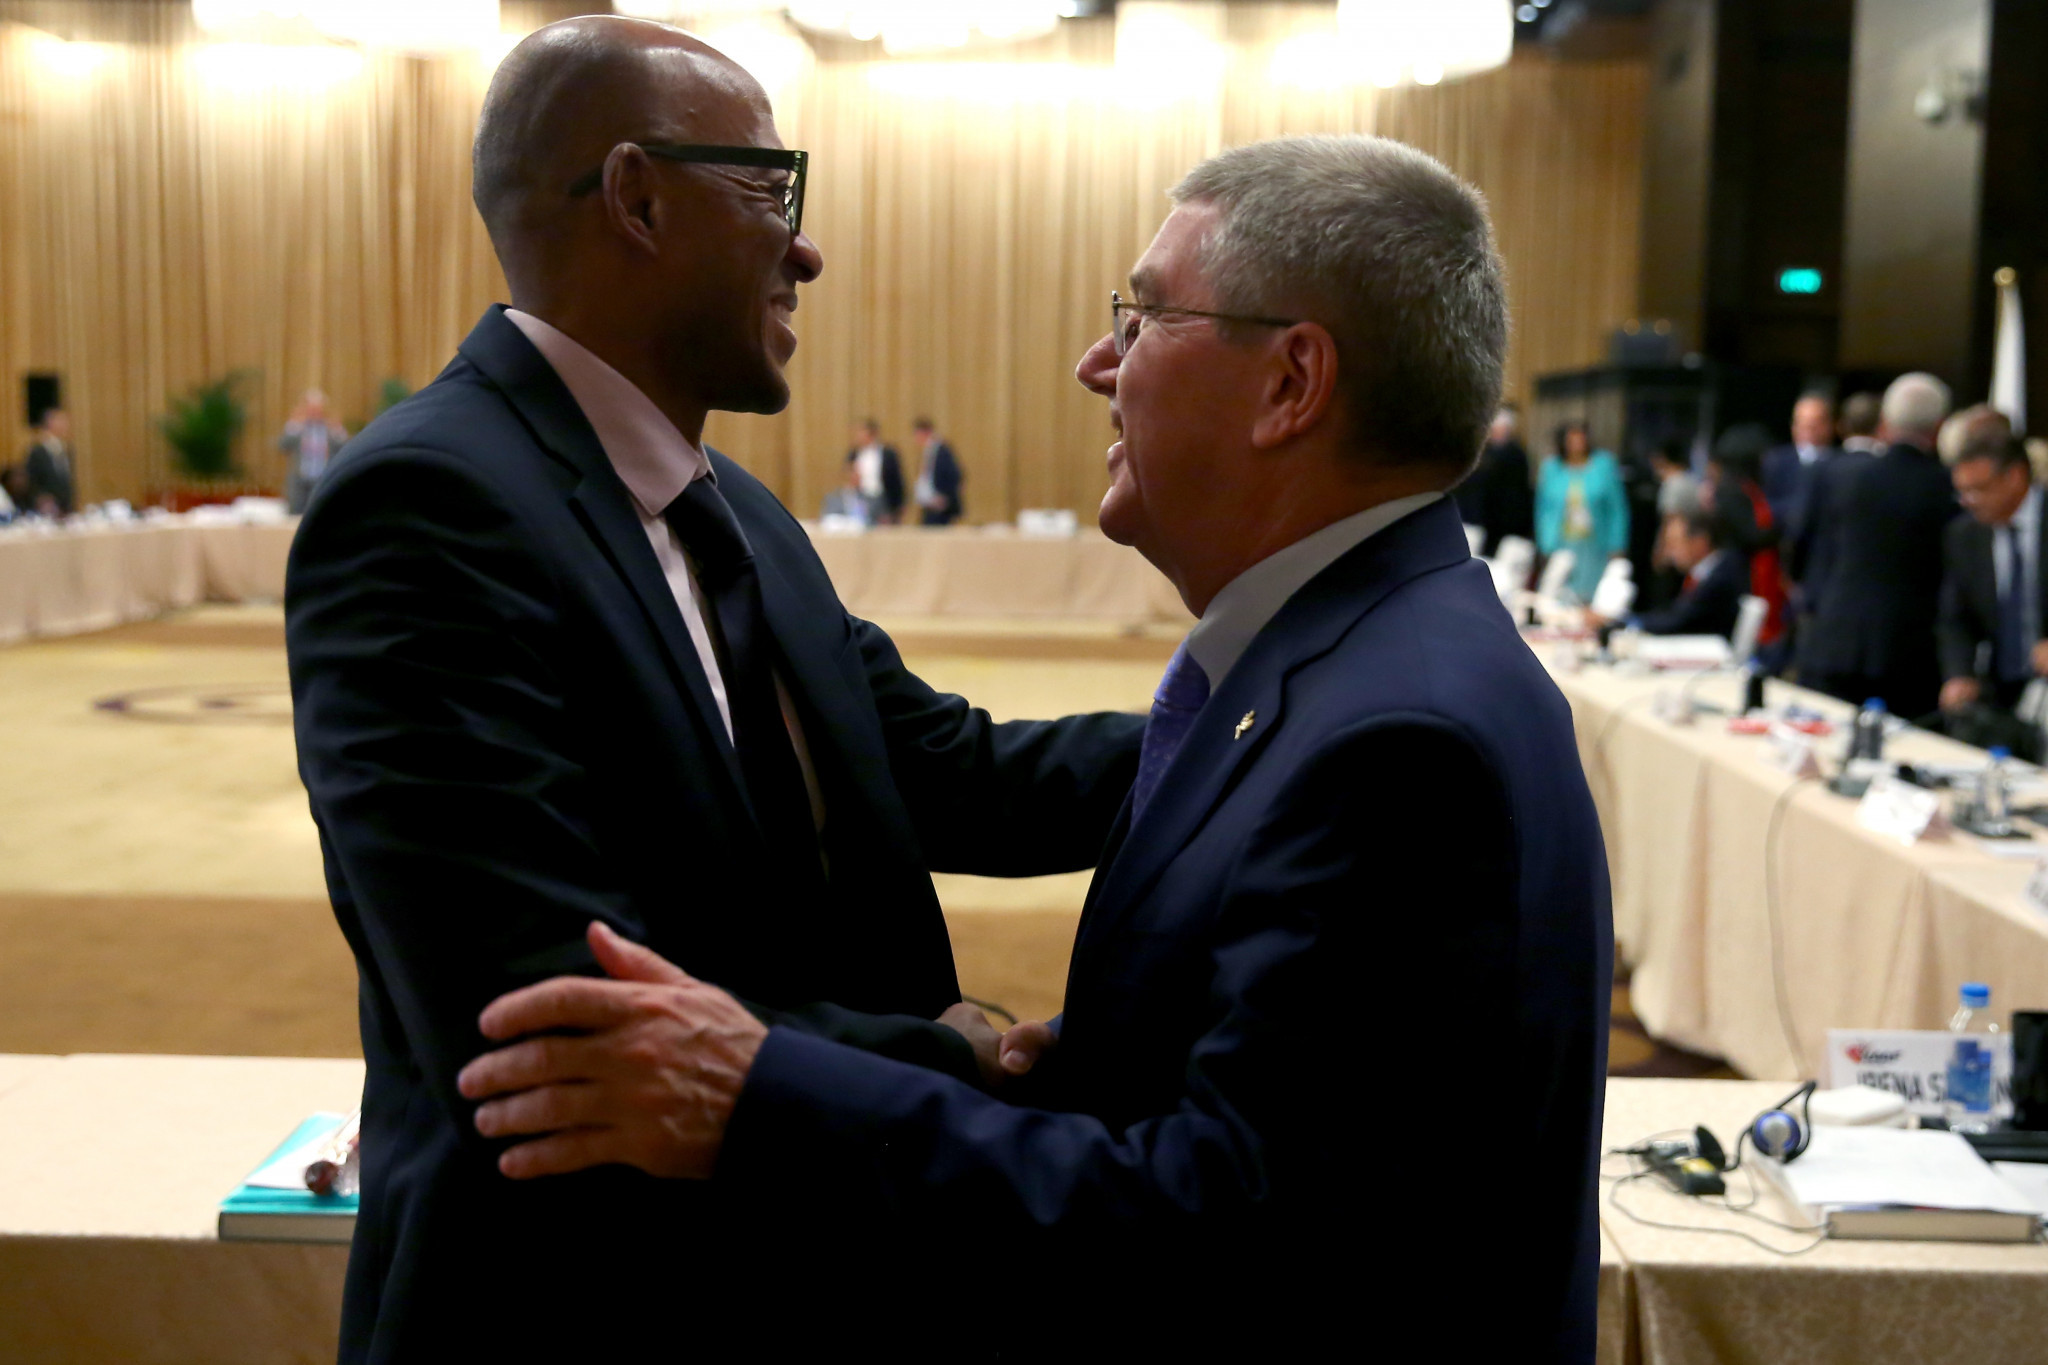 Frankie Fredericks, left, had been appointed to head the IOC Evaluation Commission for the 2024 Olympics by Thomas Bach, right, but was forced to step down after being accused of accepting bribes ©Getty Images